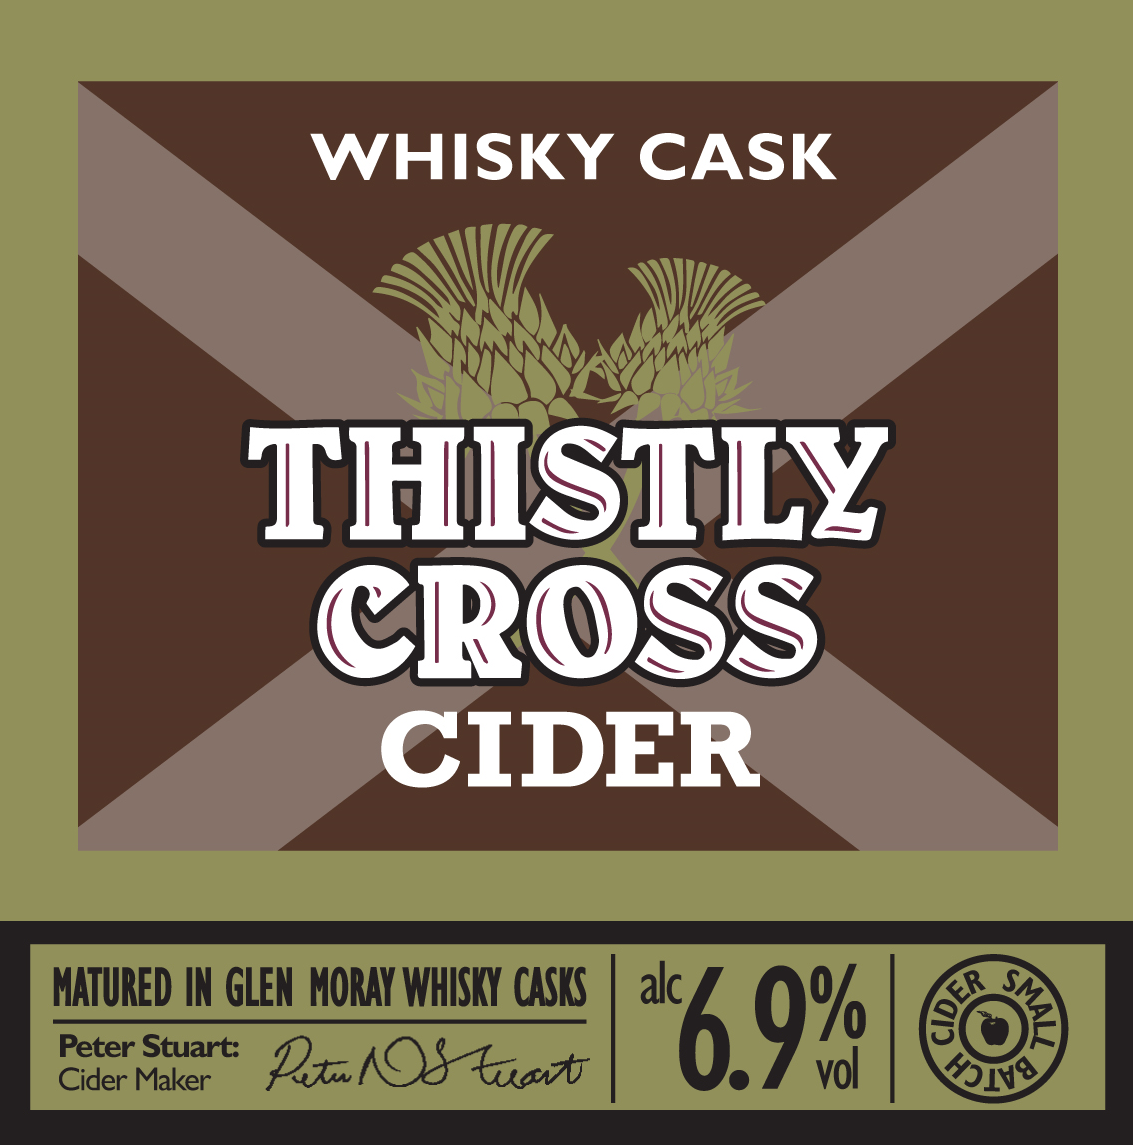 Thistly Cross Whisky Cask 20Ltr Bag In Box Clear 6.7%